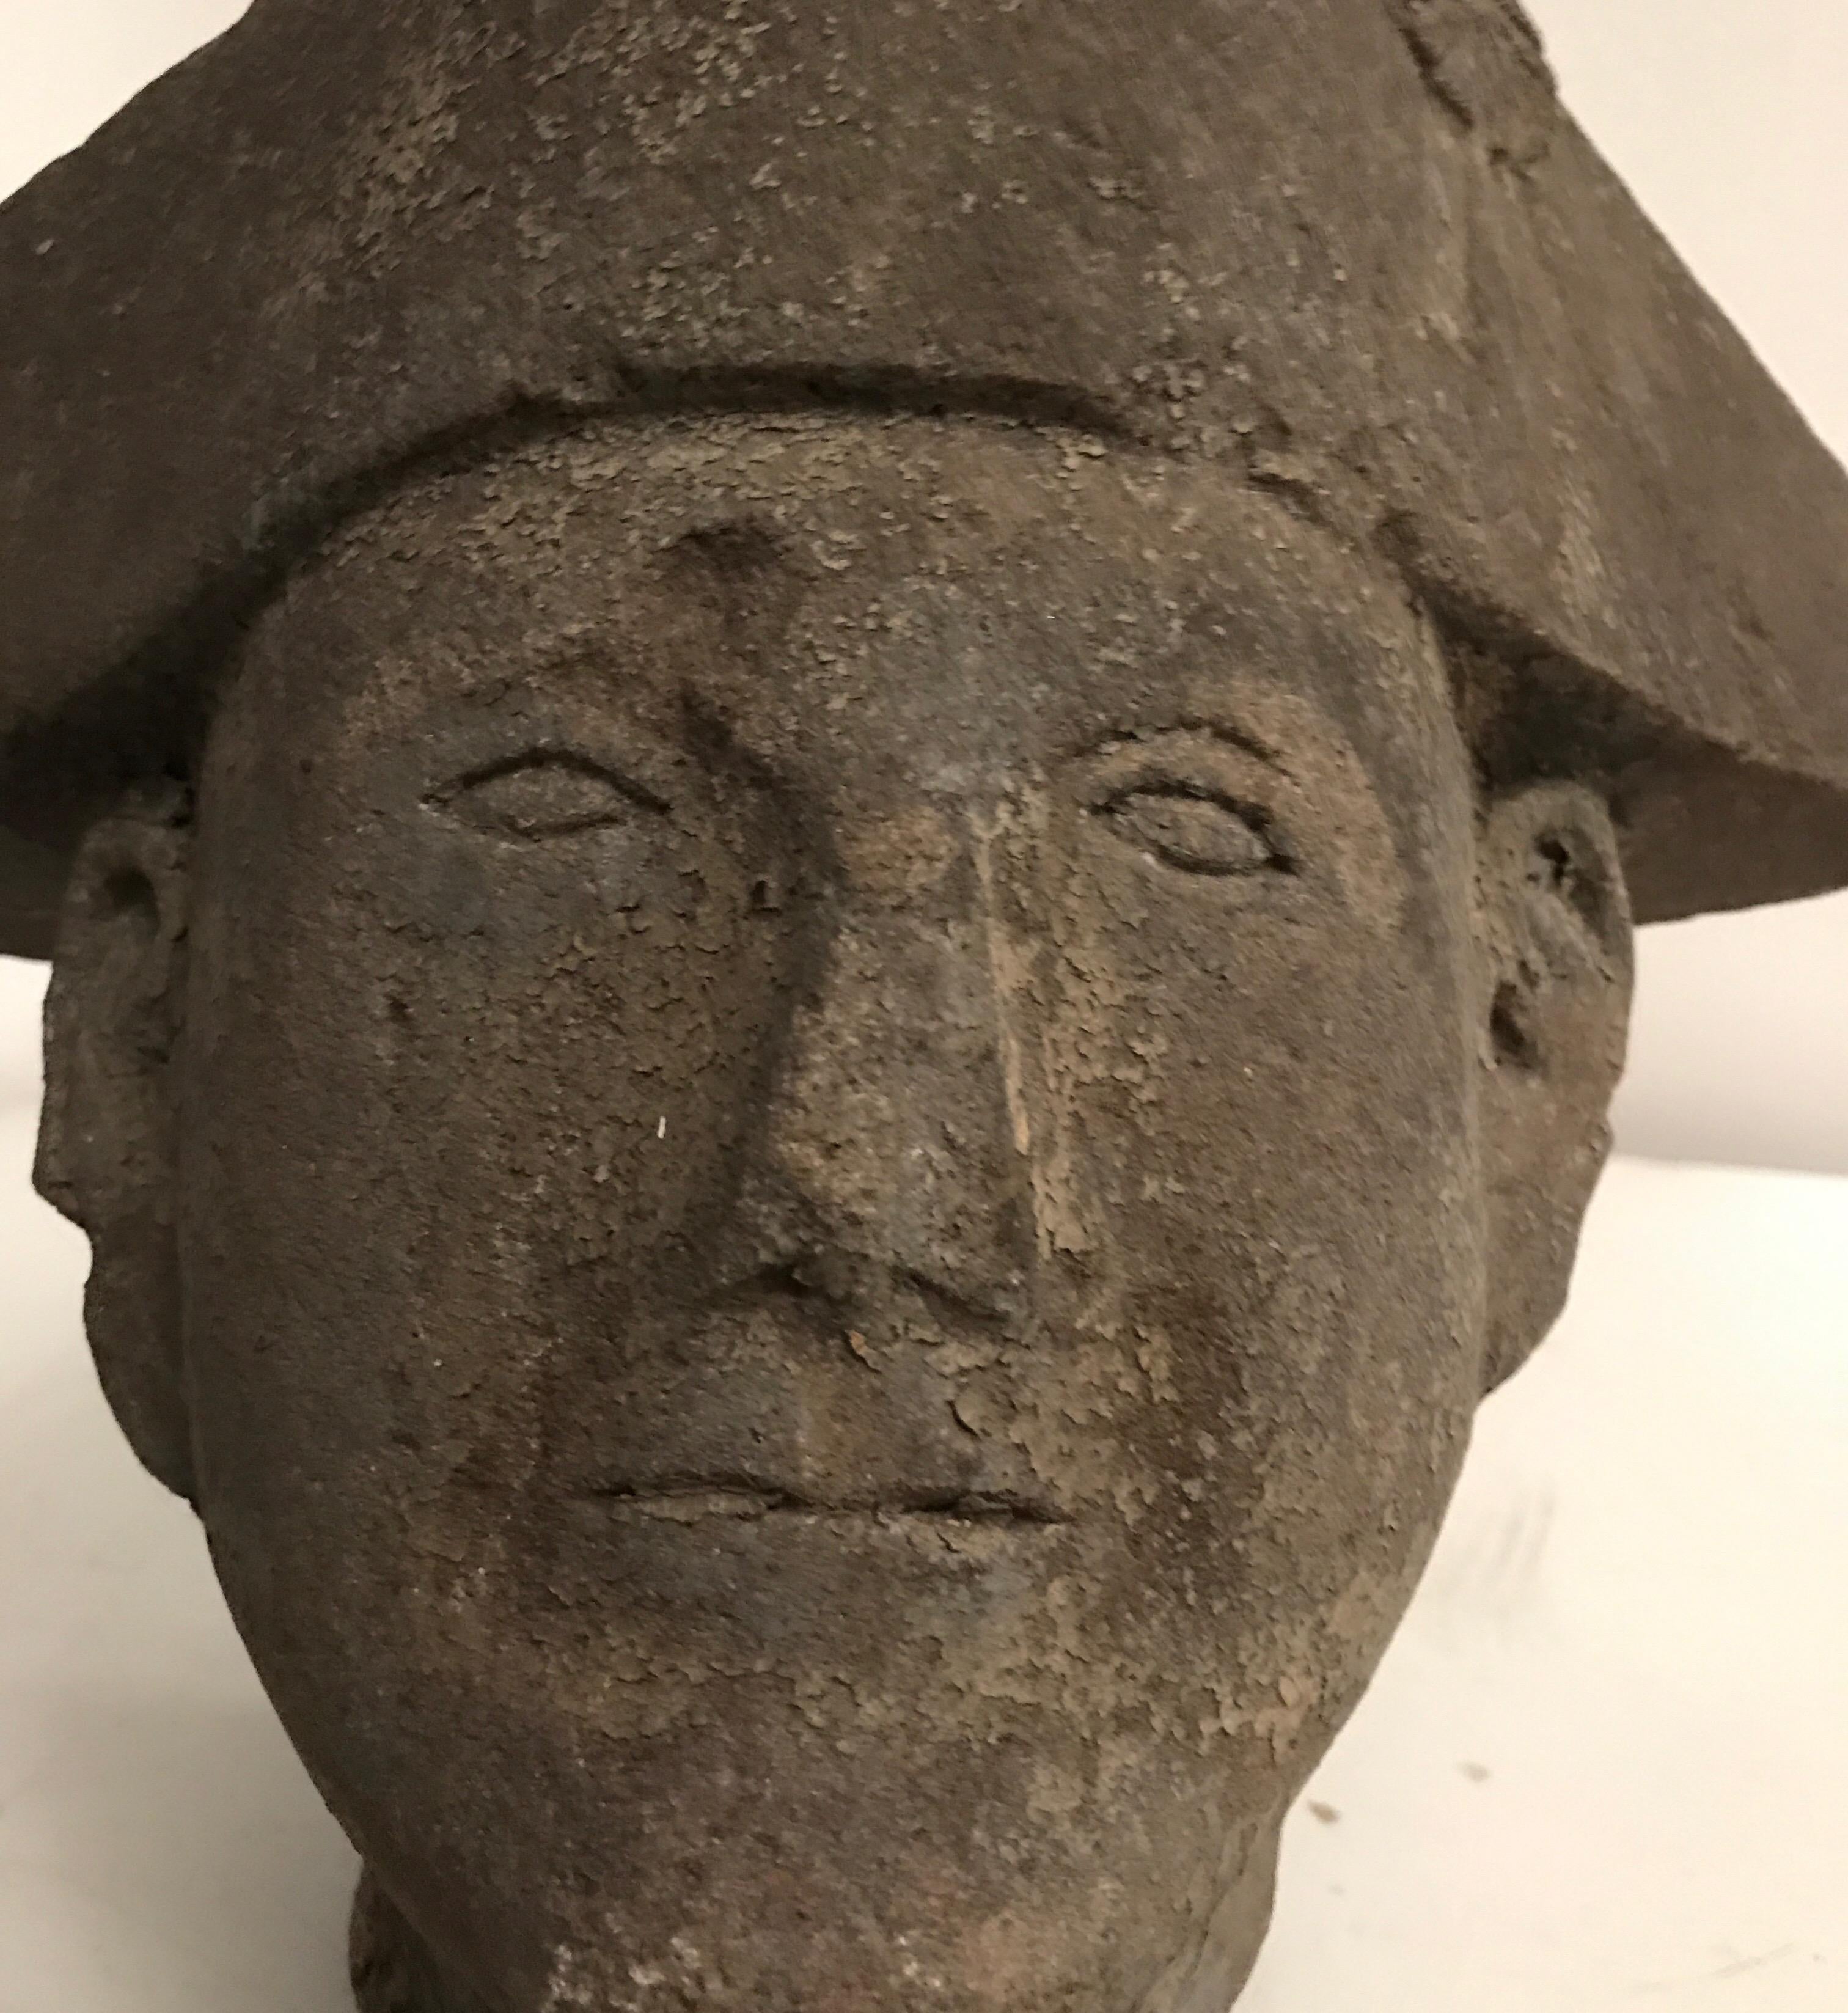 Scottish hand carved stone bust of a gentleman wearing a hat.
At the base of the back of the hat is the inscription K McK 1838
Great decorative object for either indoors or outdoors.
The bust has a primitive folk art feel.